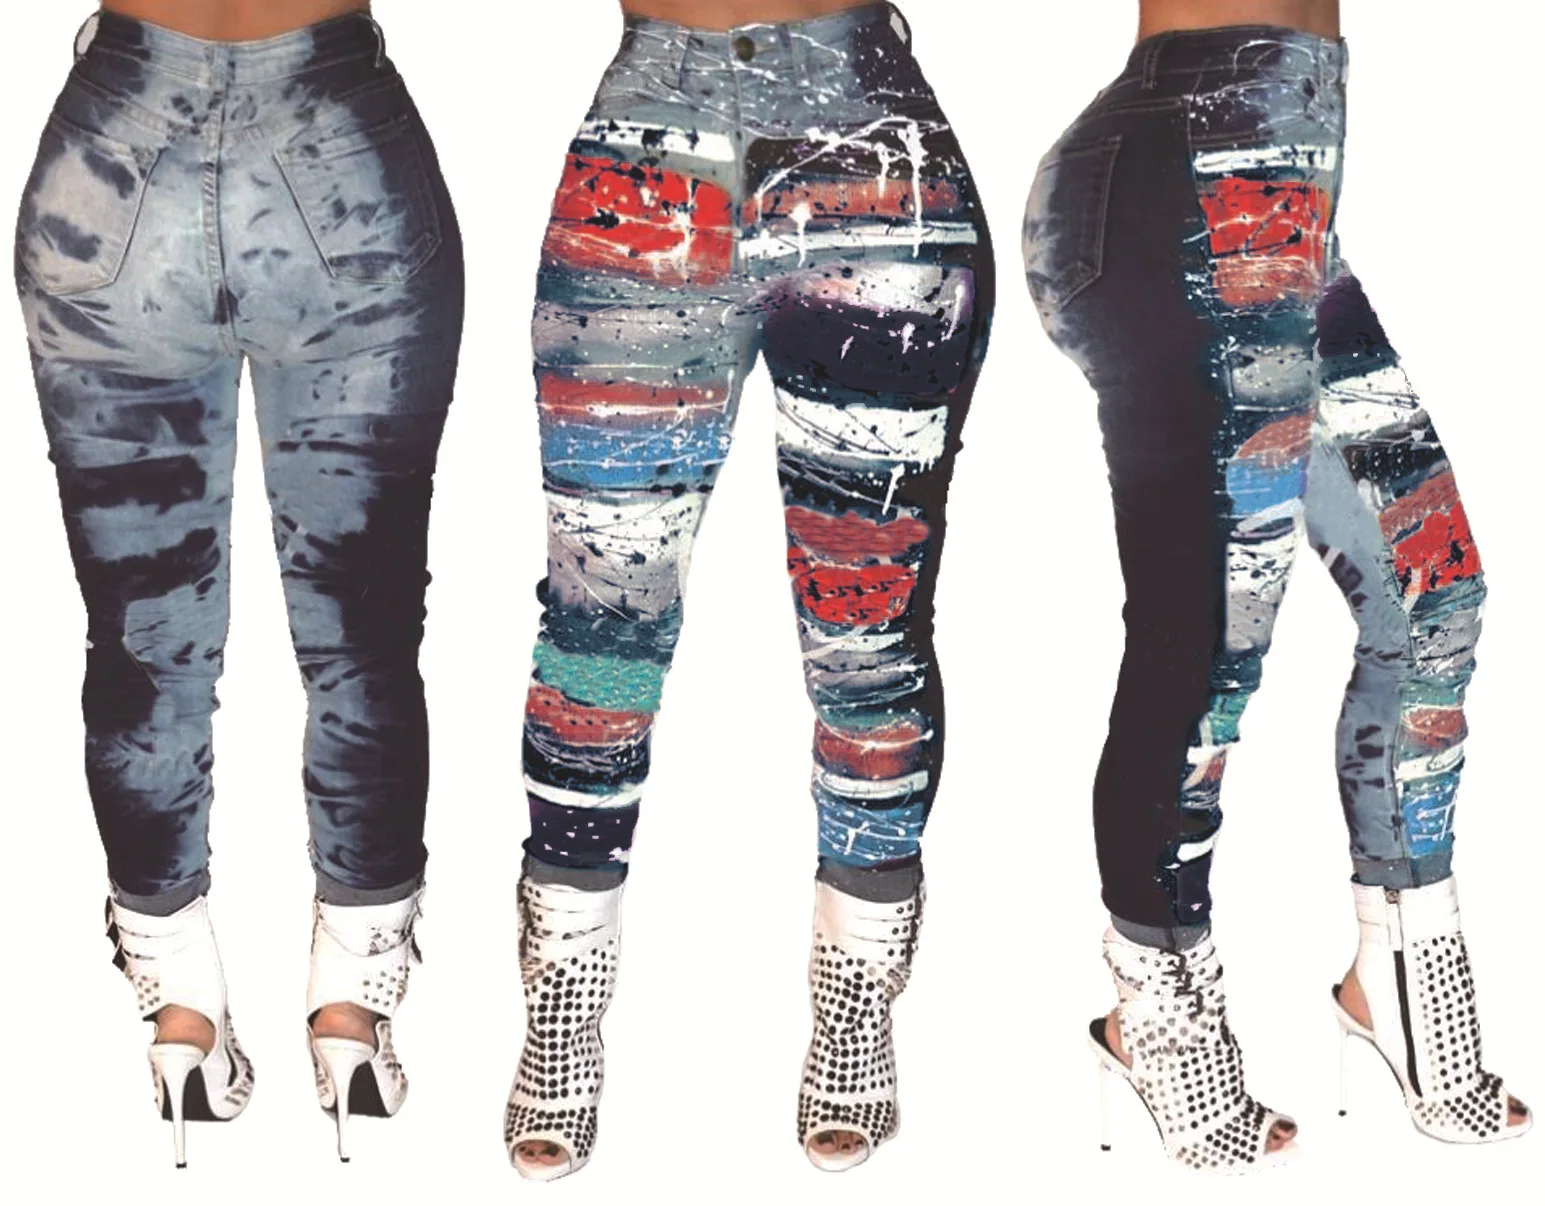 Wanghongyue Spring 2021 Women's Casual Fashion Icon Jeans Digital Print Casual Pants Tight-fitting leggings in S-3XL